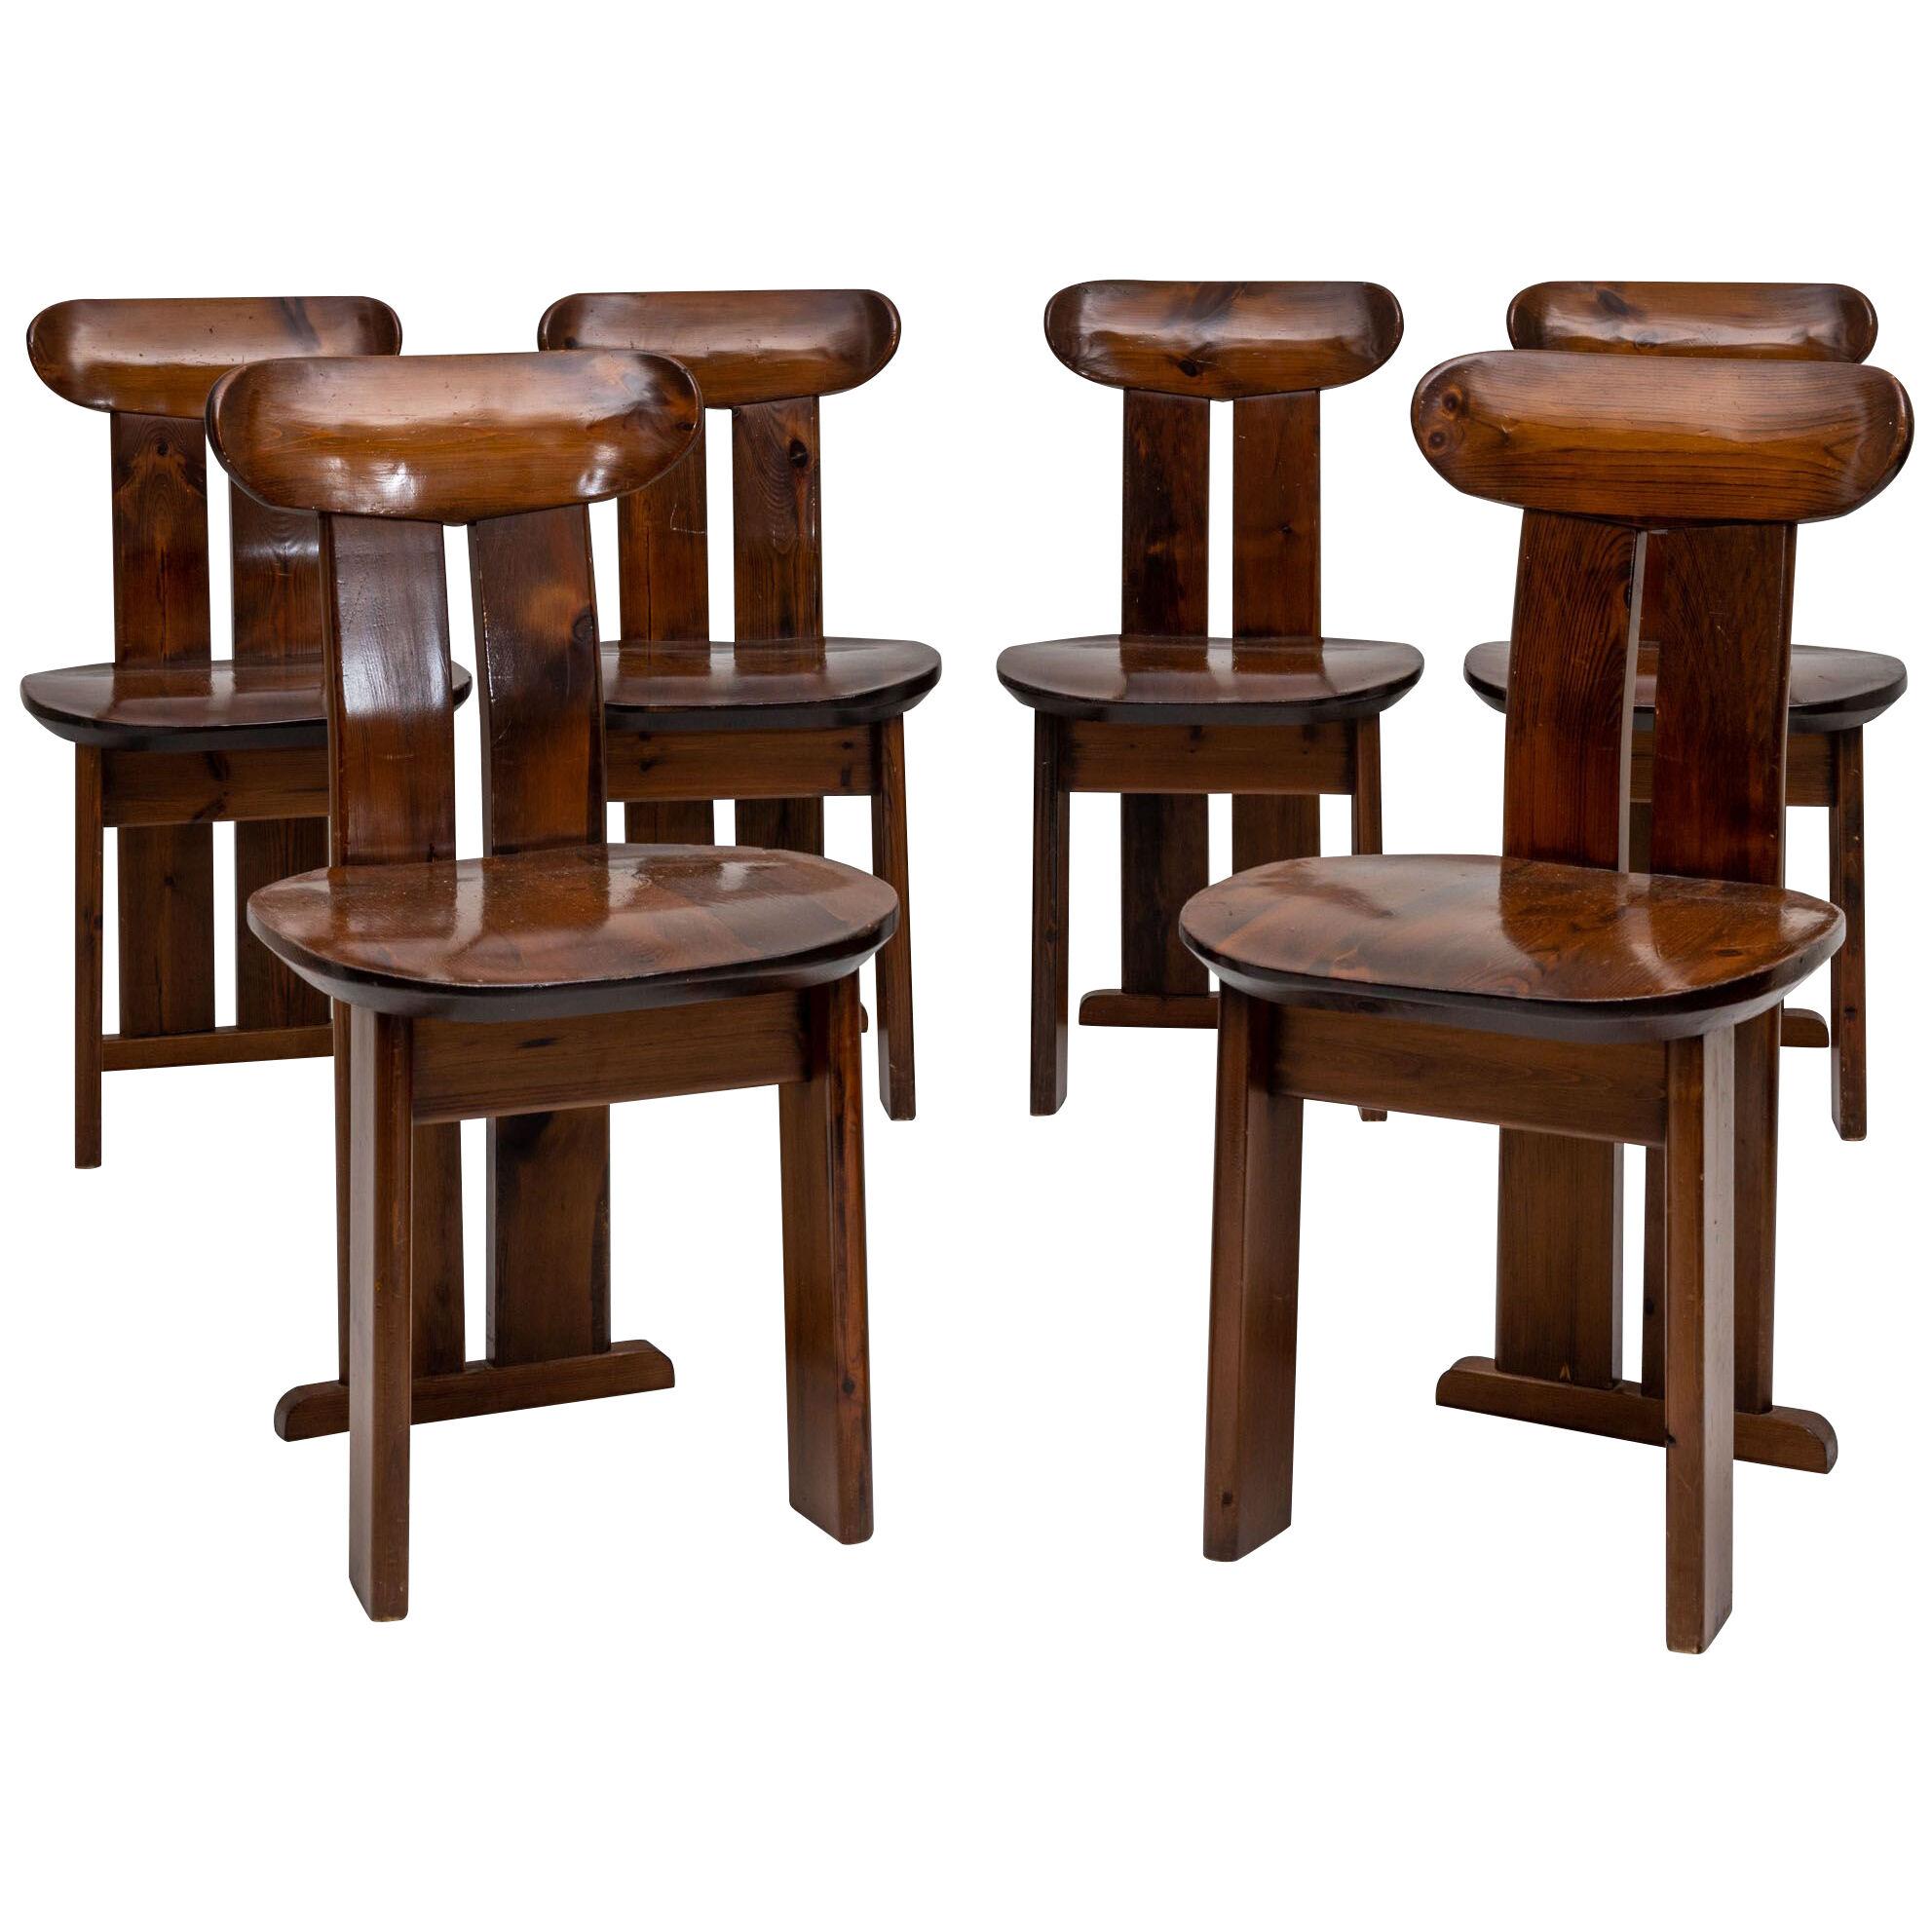 Dining Room Chairs, attr. to Mario Marenco, Italy 1970s